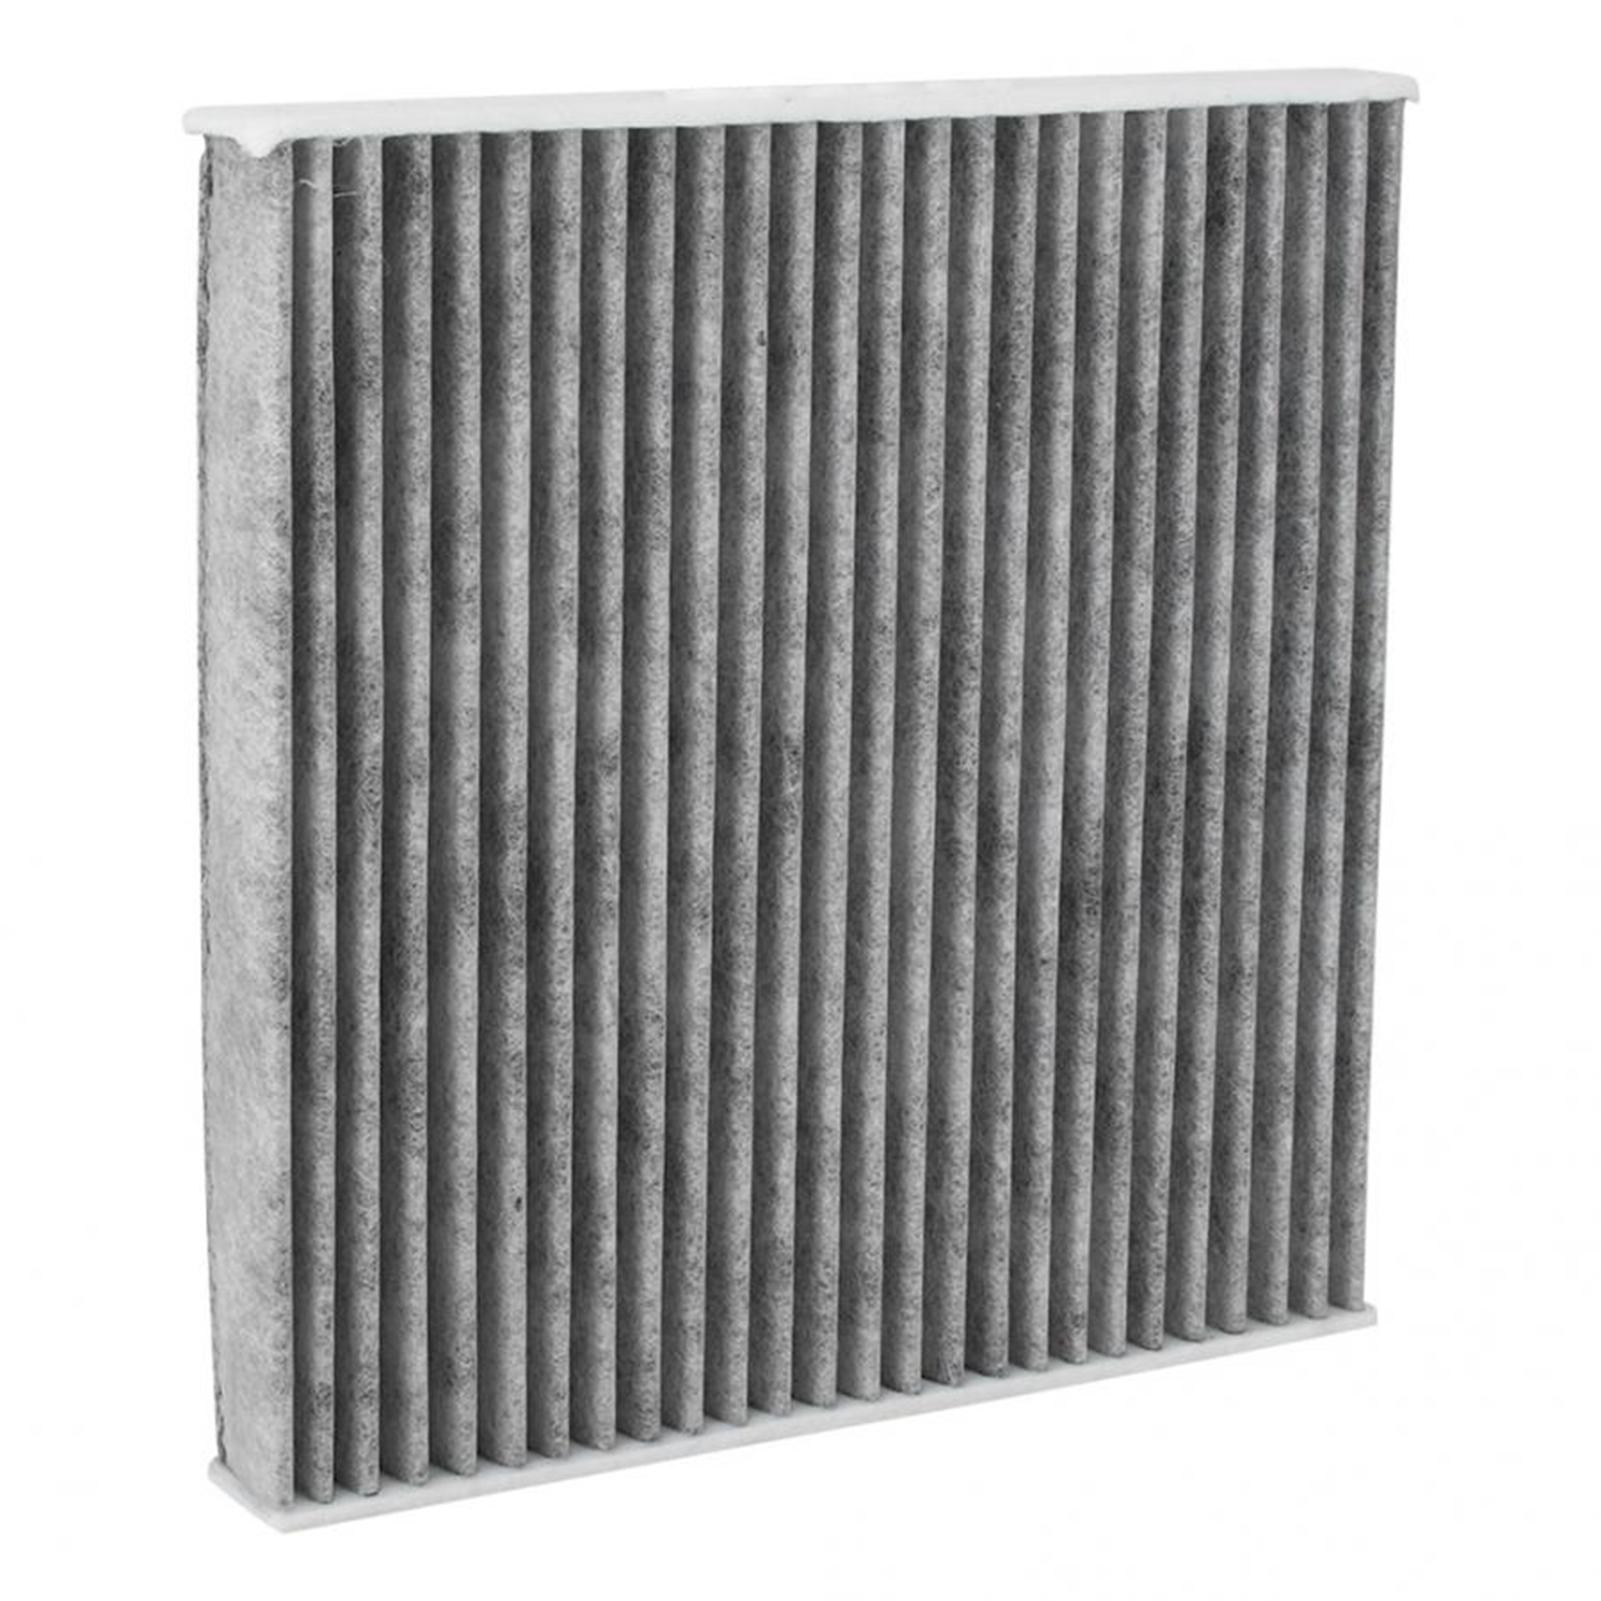 Activated Carbon Cabine Luchtfilter Vervanging Accessoires CF10134 Voor Honda Auto Airconditioner Filters